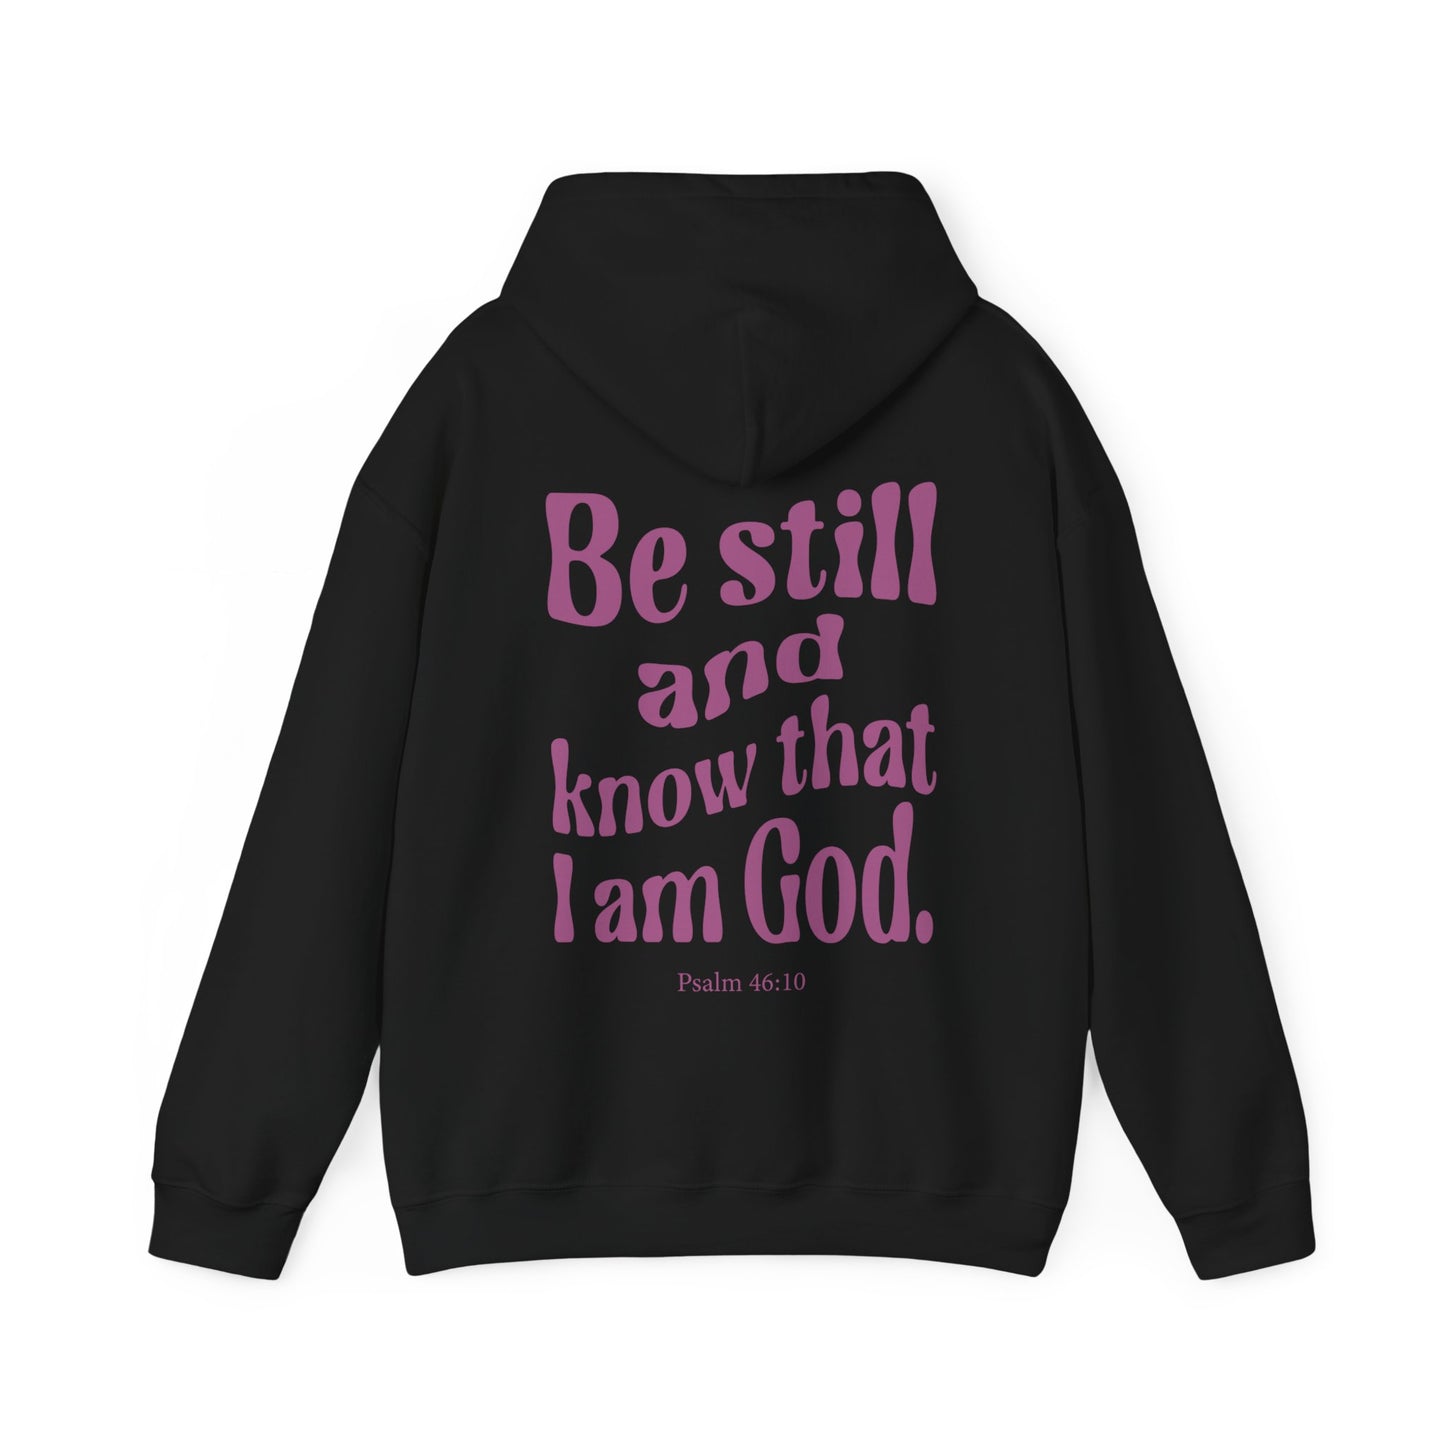 Autumn Russell: Psalm 46:10 Hoodie